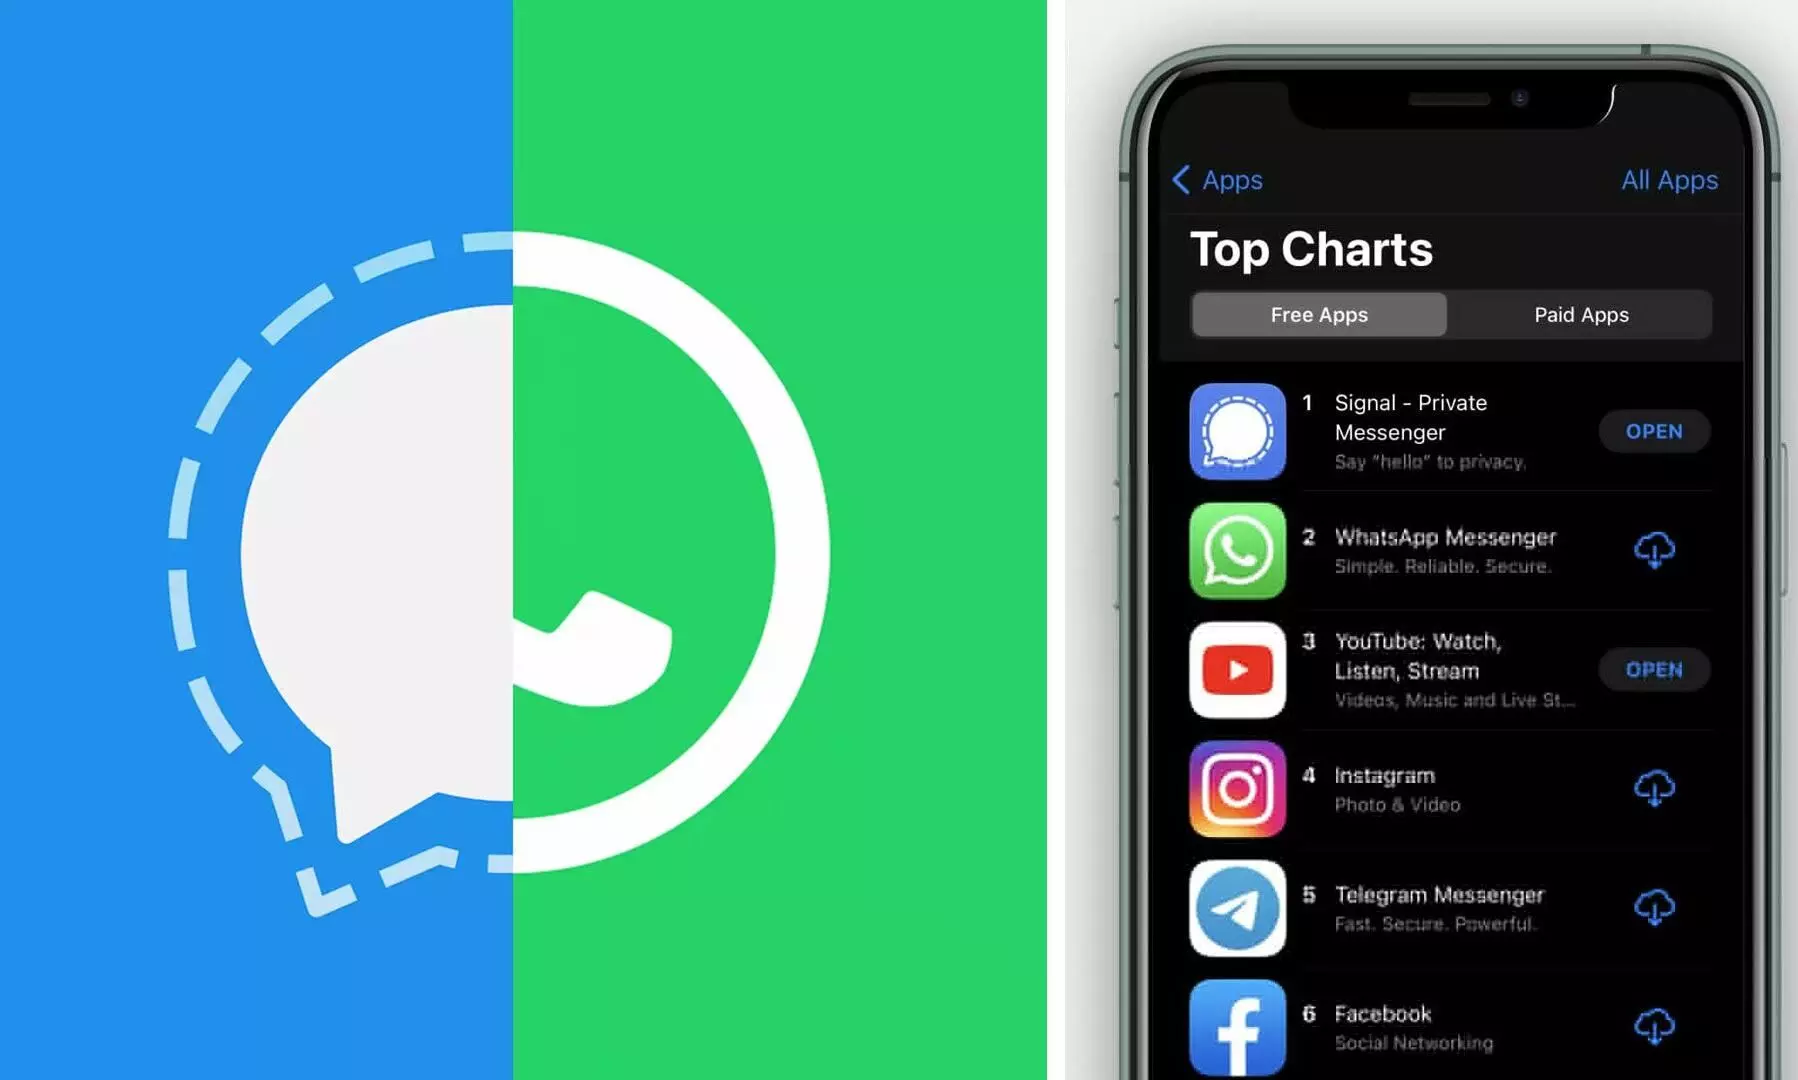 Signal tops free apps category on App Store beating WhatsApp